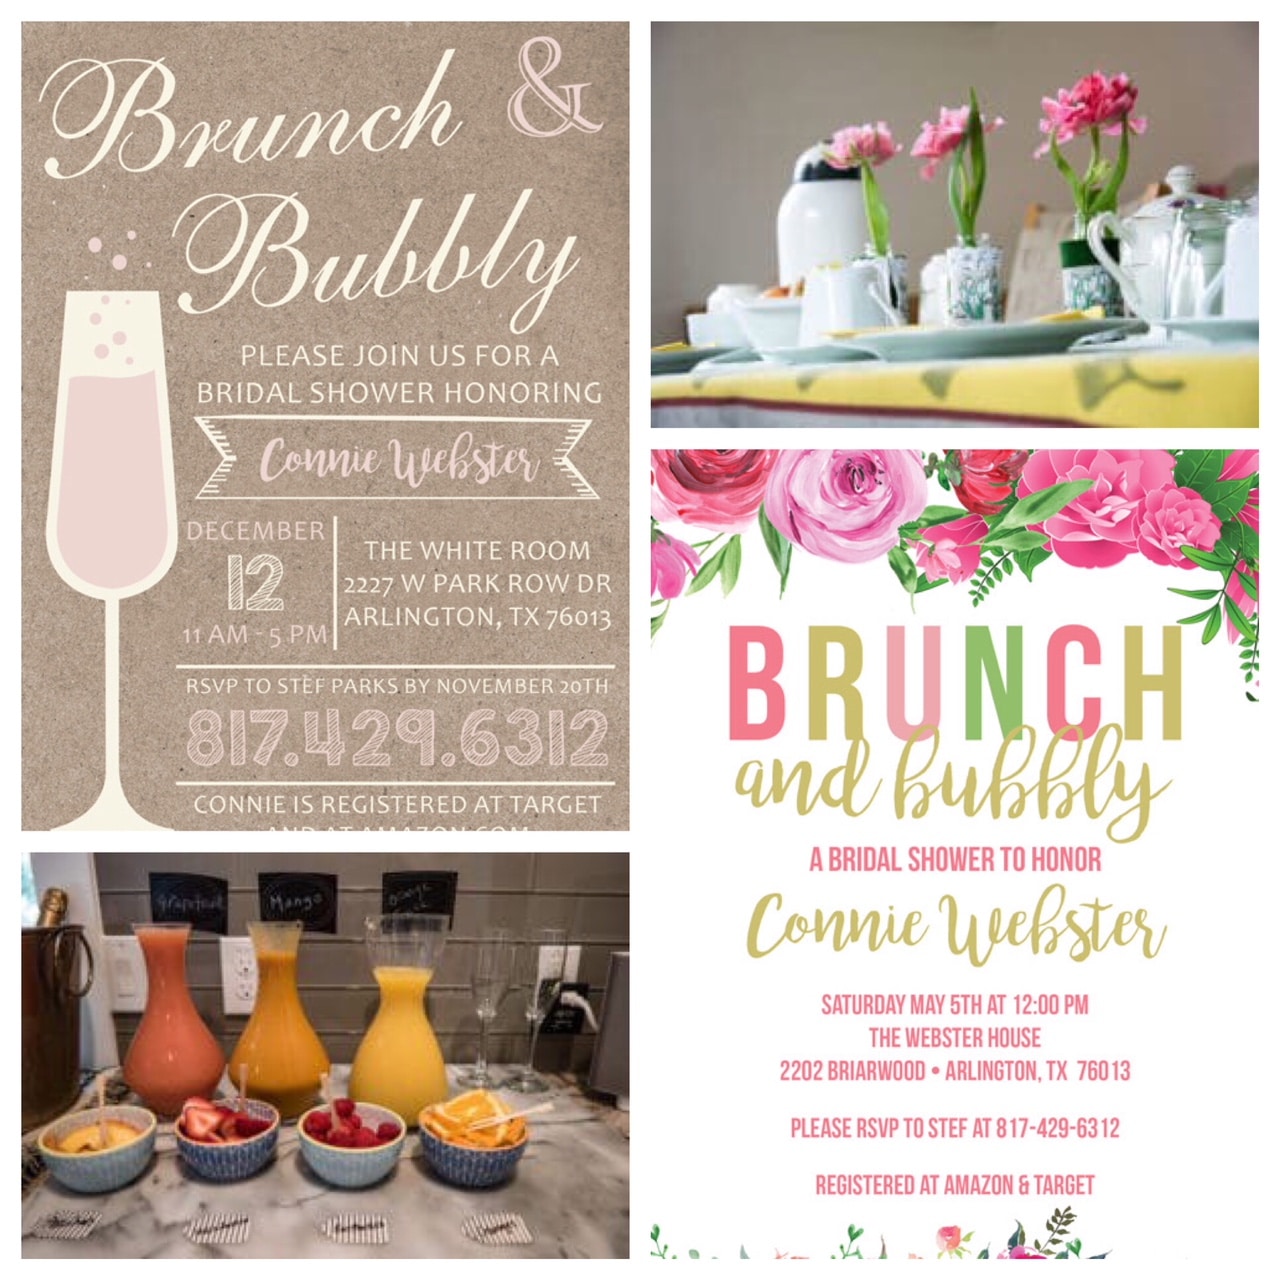 How To Host A Chic Brunch & Bubbly Bridal Shower Party